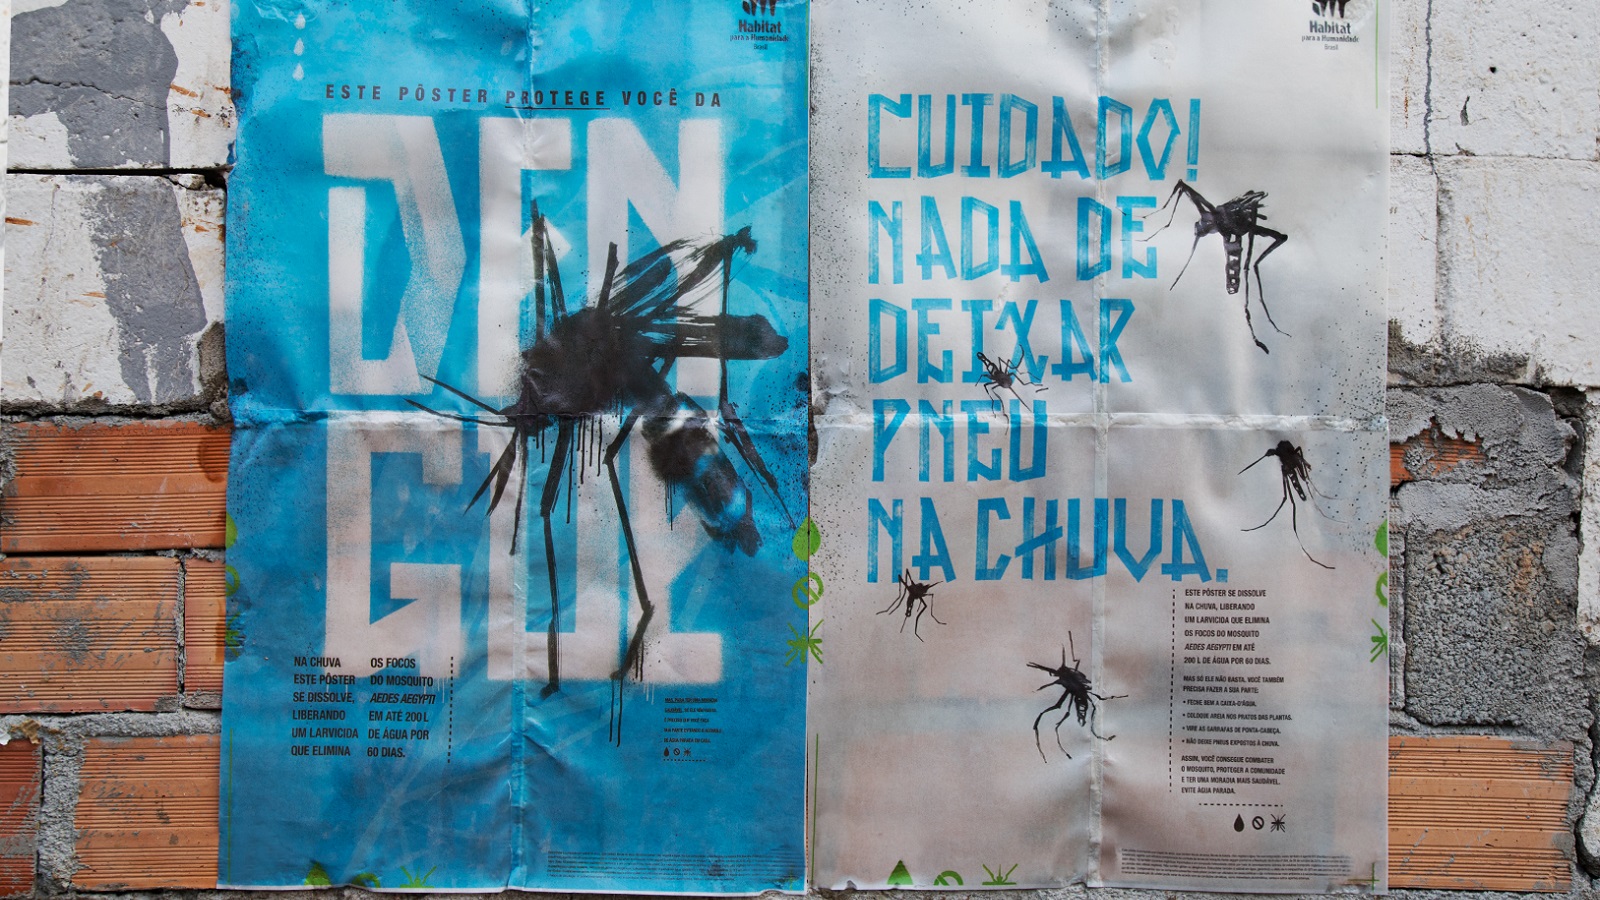 Clever Poster Dissolves into a Mosquito Trap in Rain